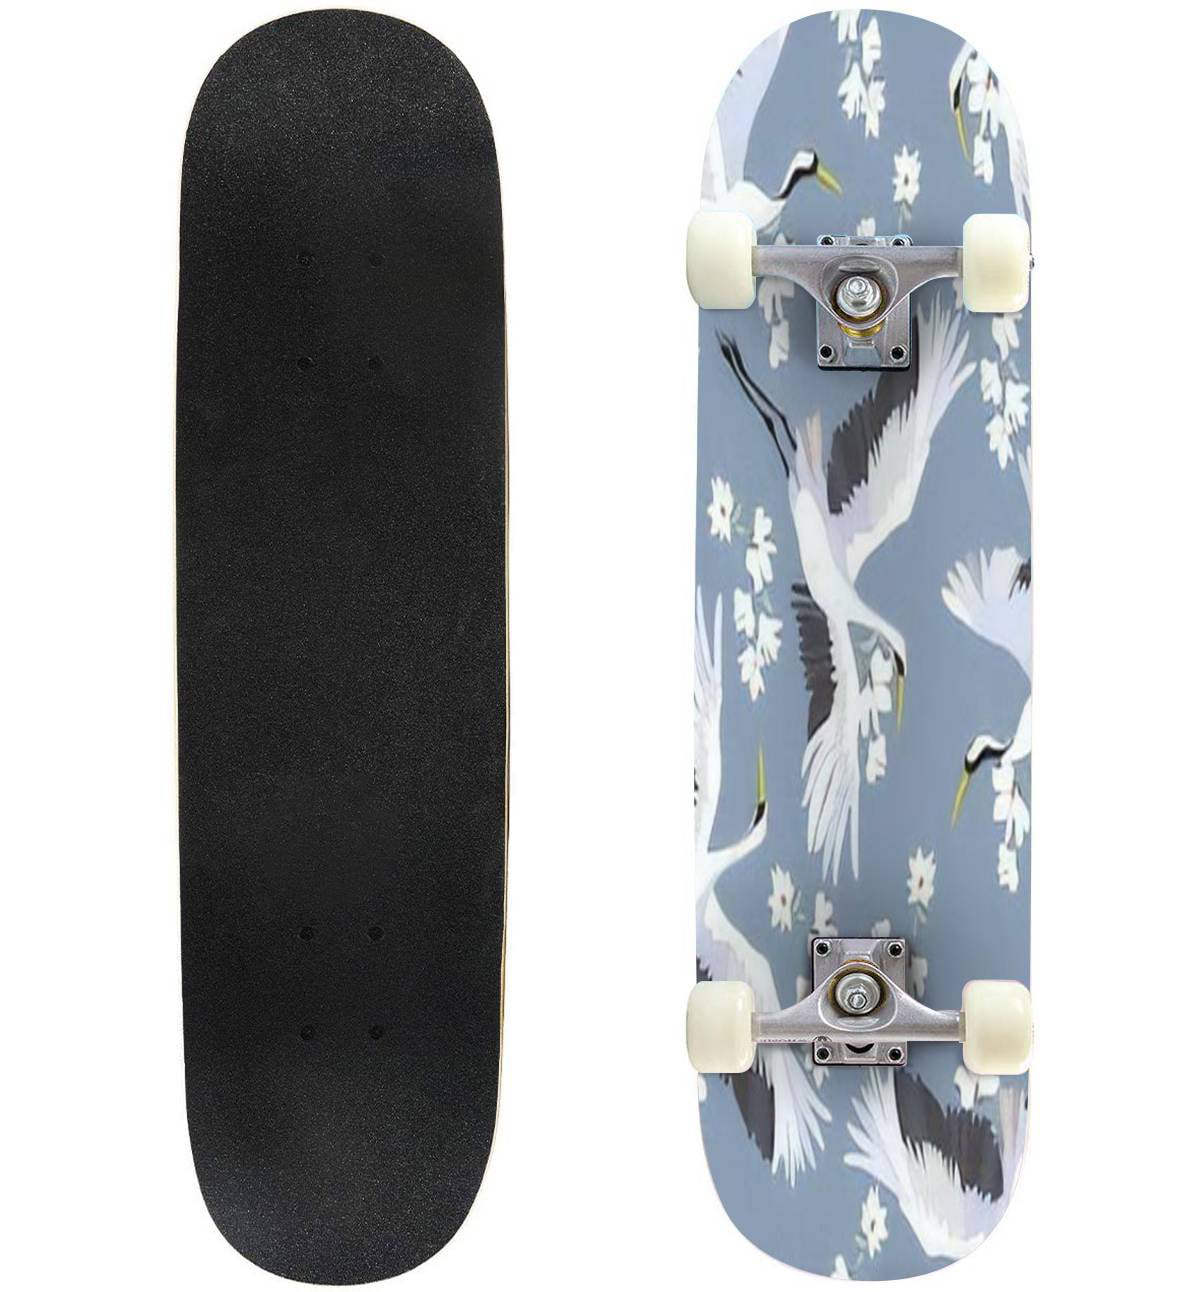 bird owl on a branch Skateboard Complete Longboard 8 Layers Maple Decks Double Kick Concave Skate Board watercolor collection of plants and flowers 31x8 Standard Tricks Skateboards Outdoors 